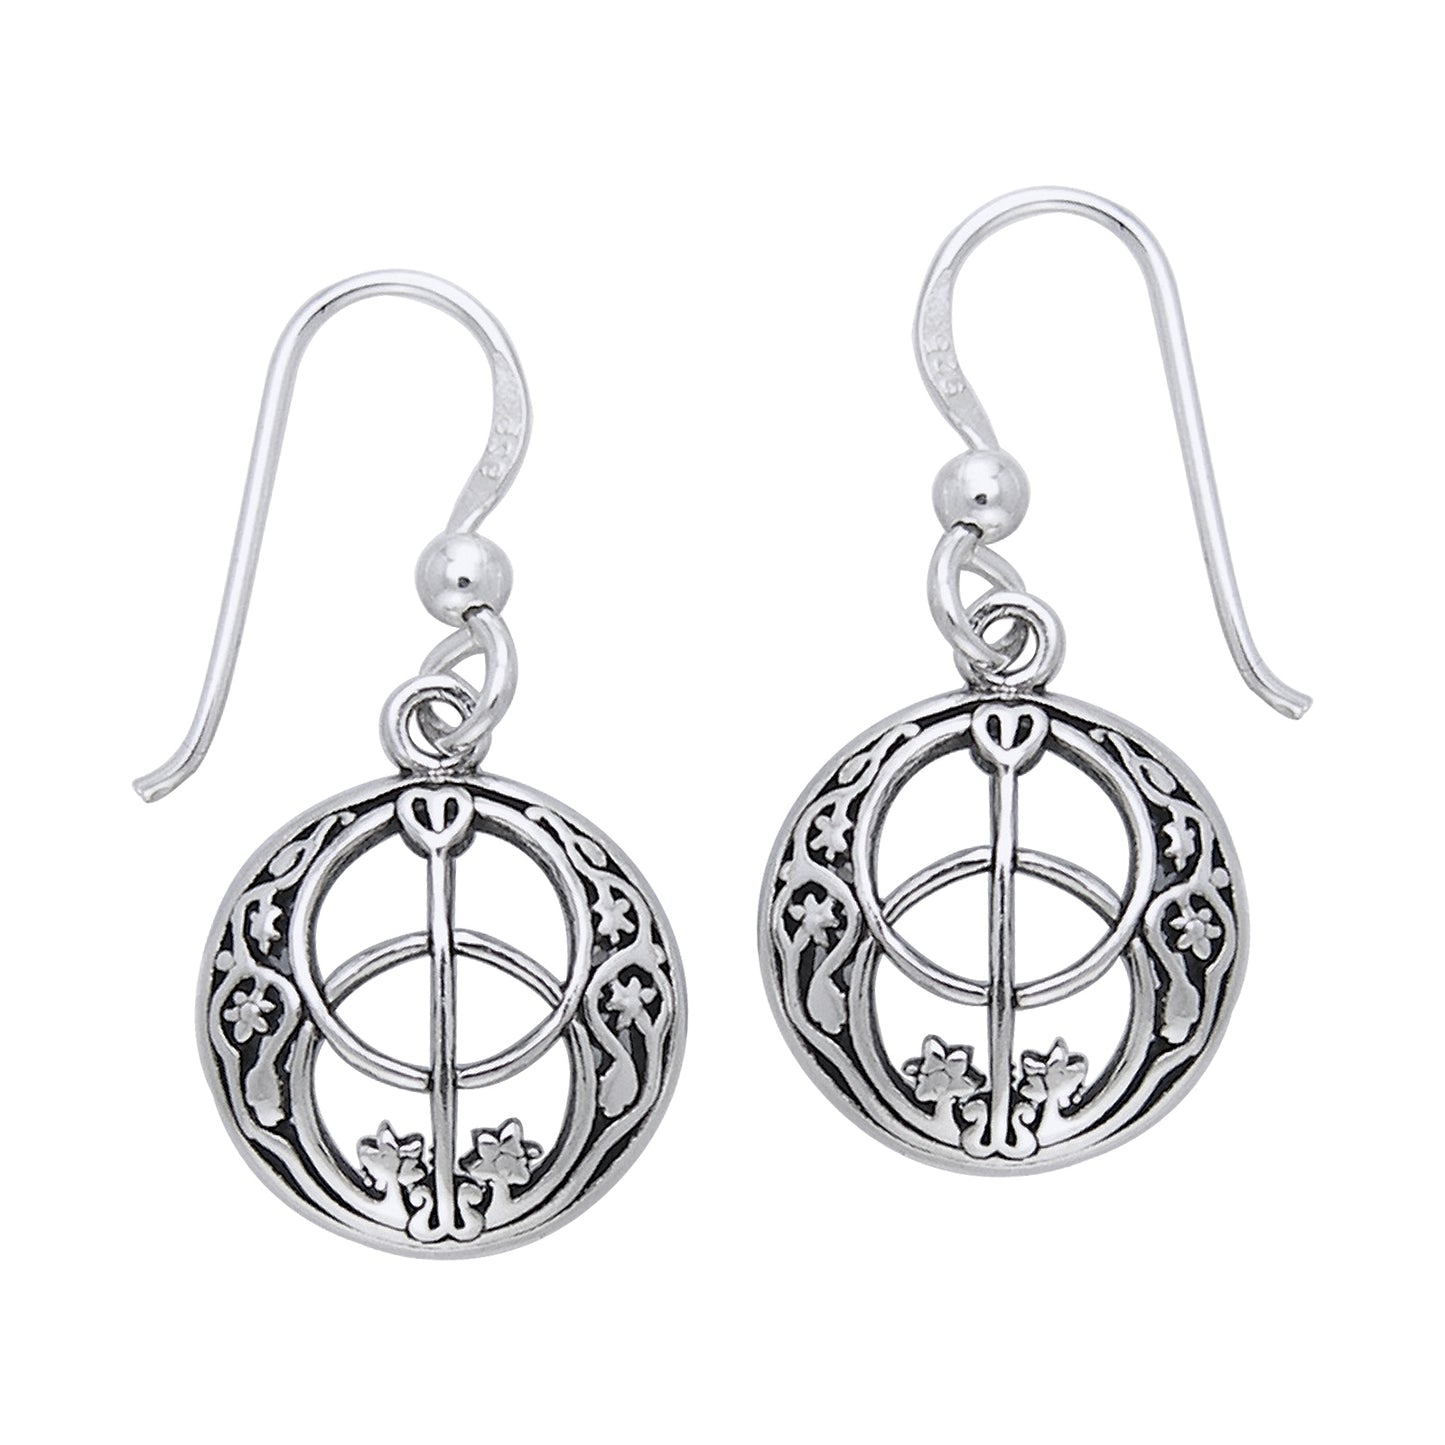 Chalice Well Symbol of Avalon Sterling Silver Earrings - Silver Insanity